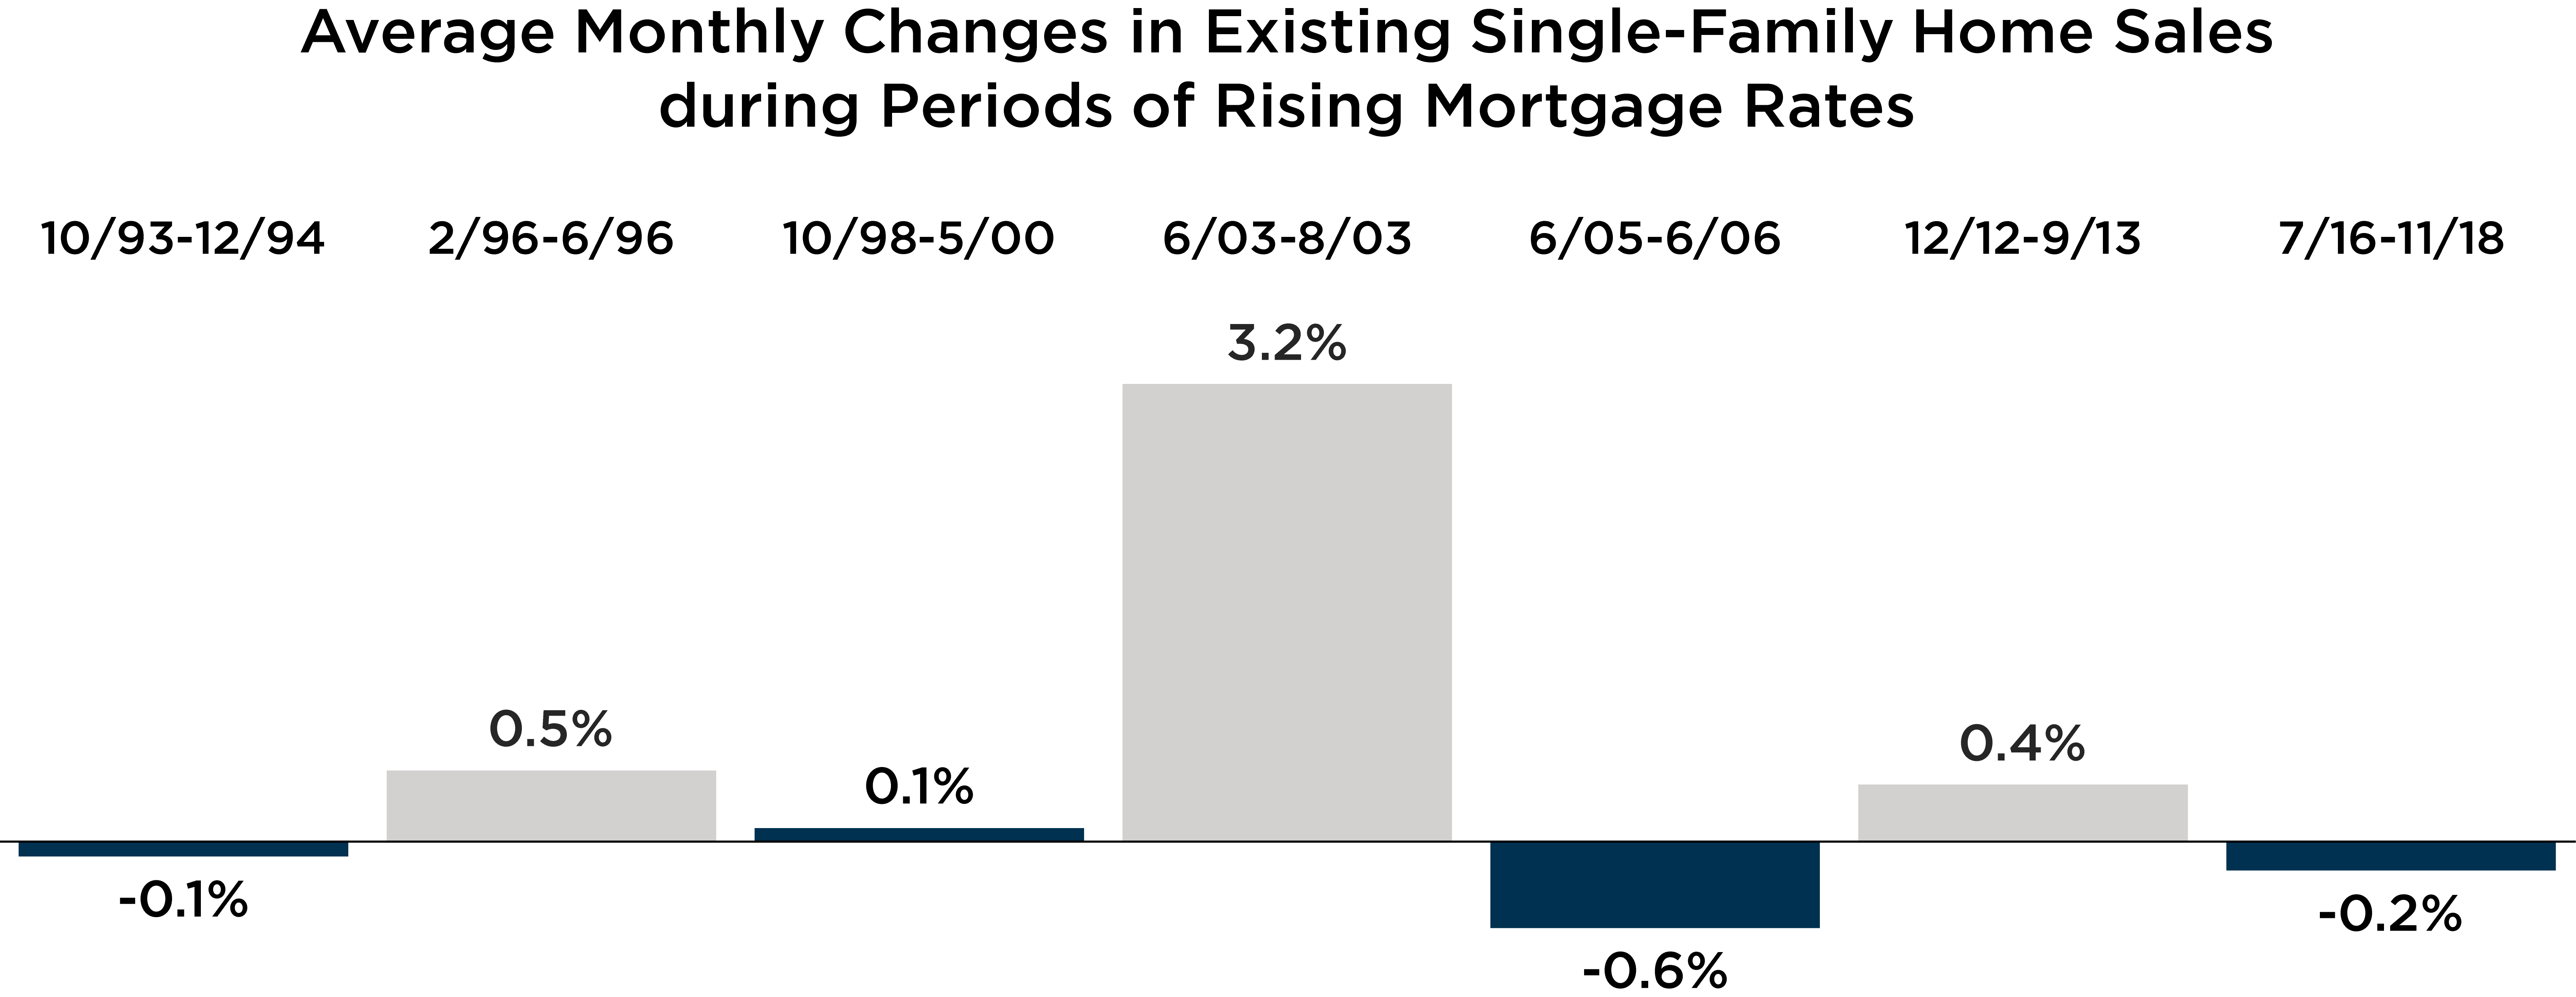 Graph depicting average monthly changes in existing single family home sales during periods of rising mortgage rates